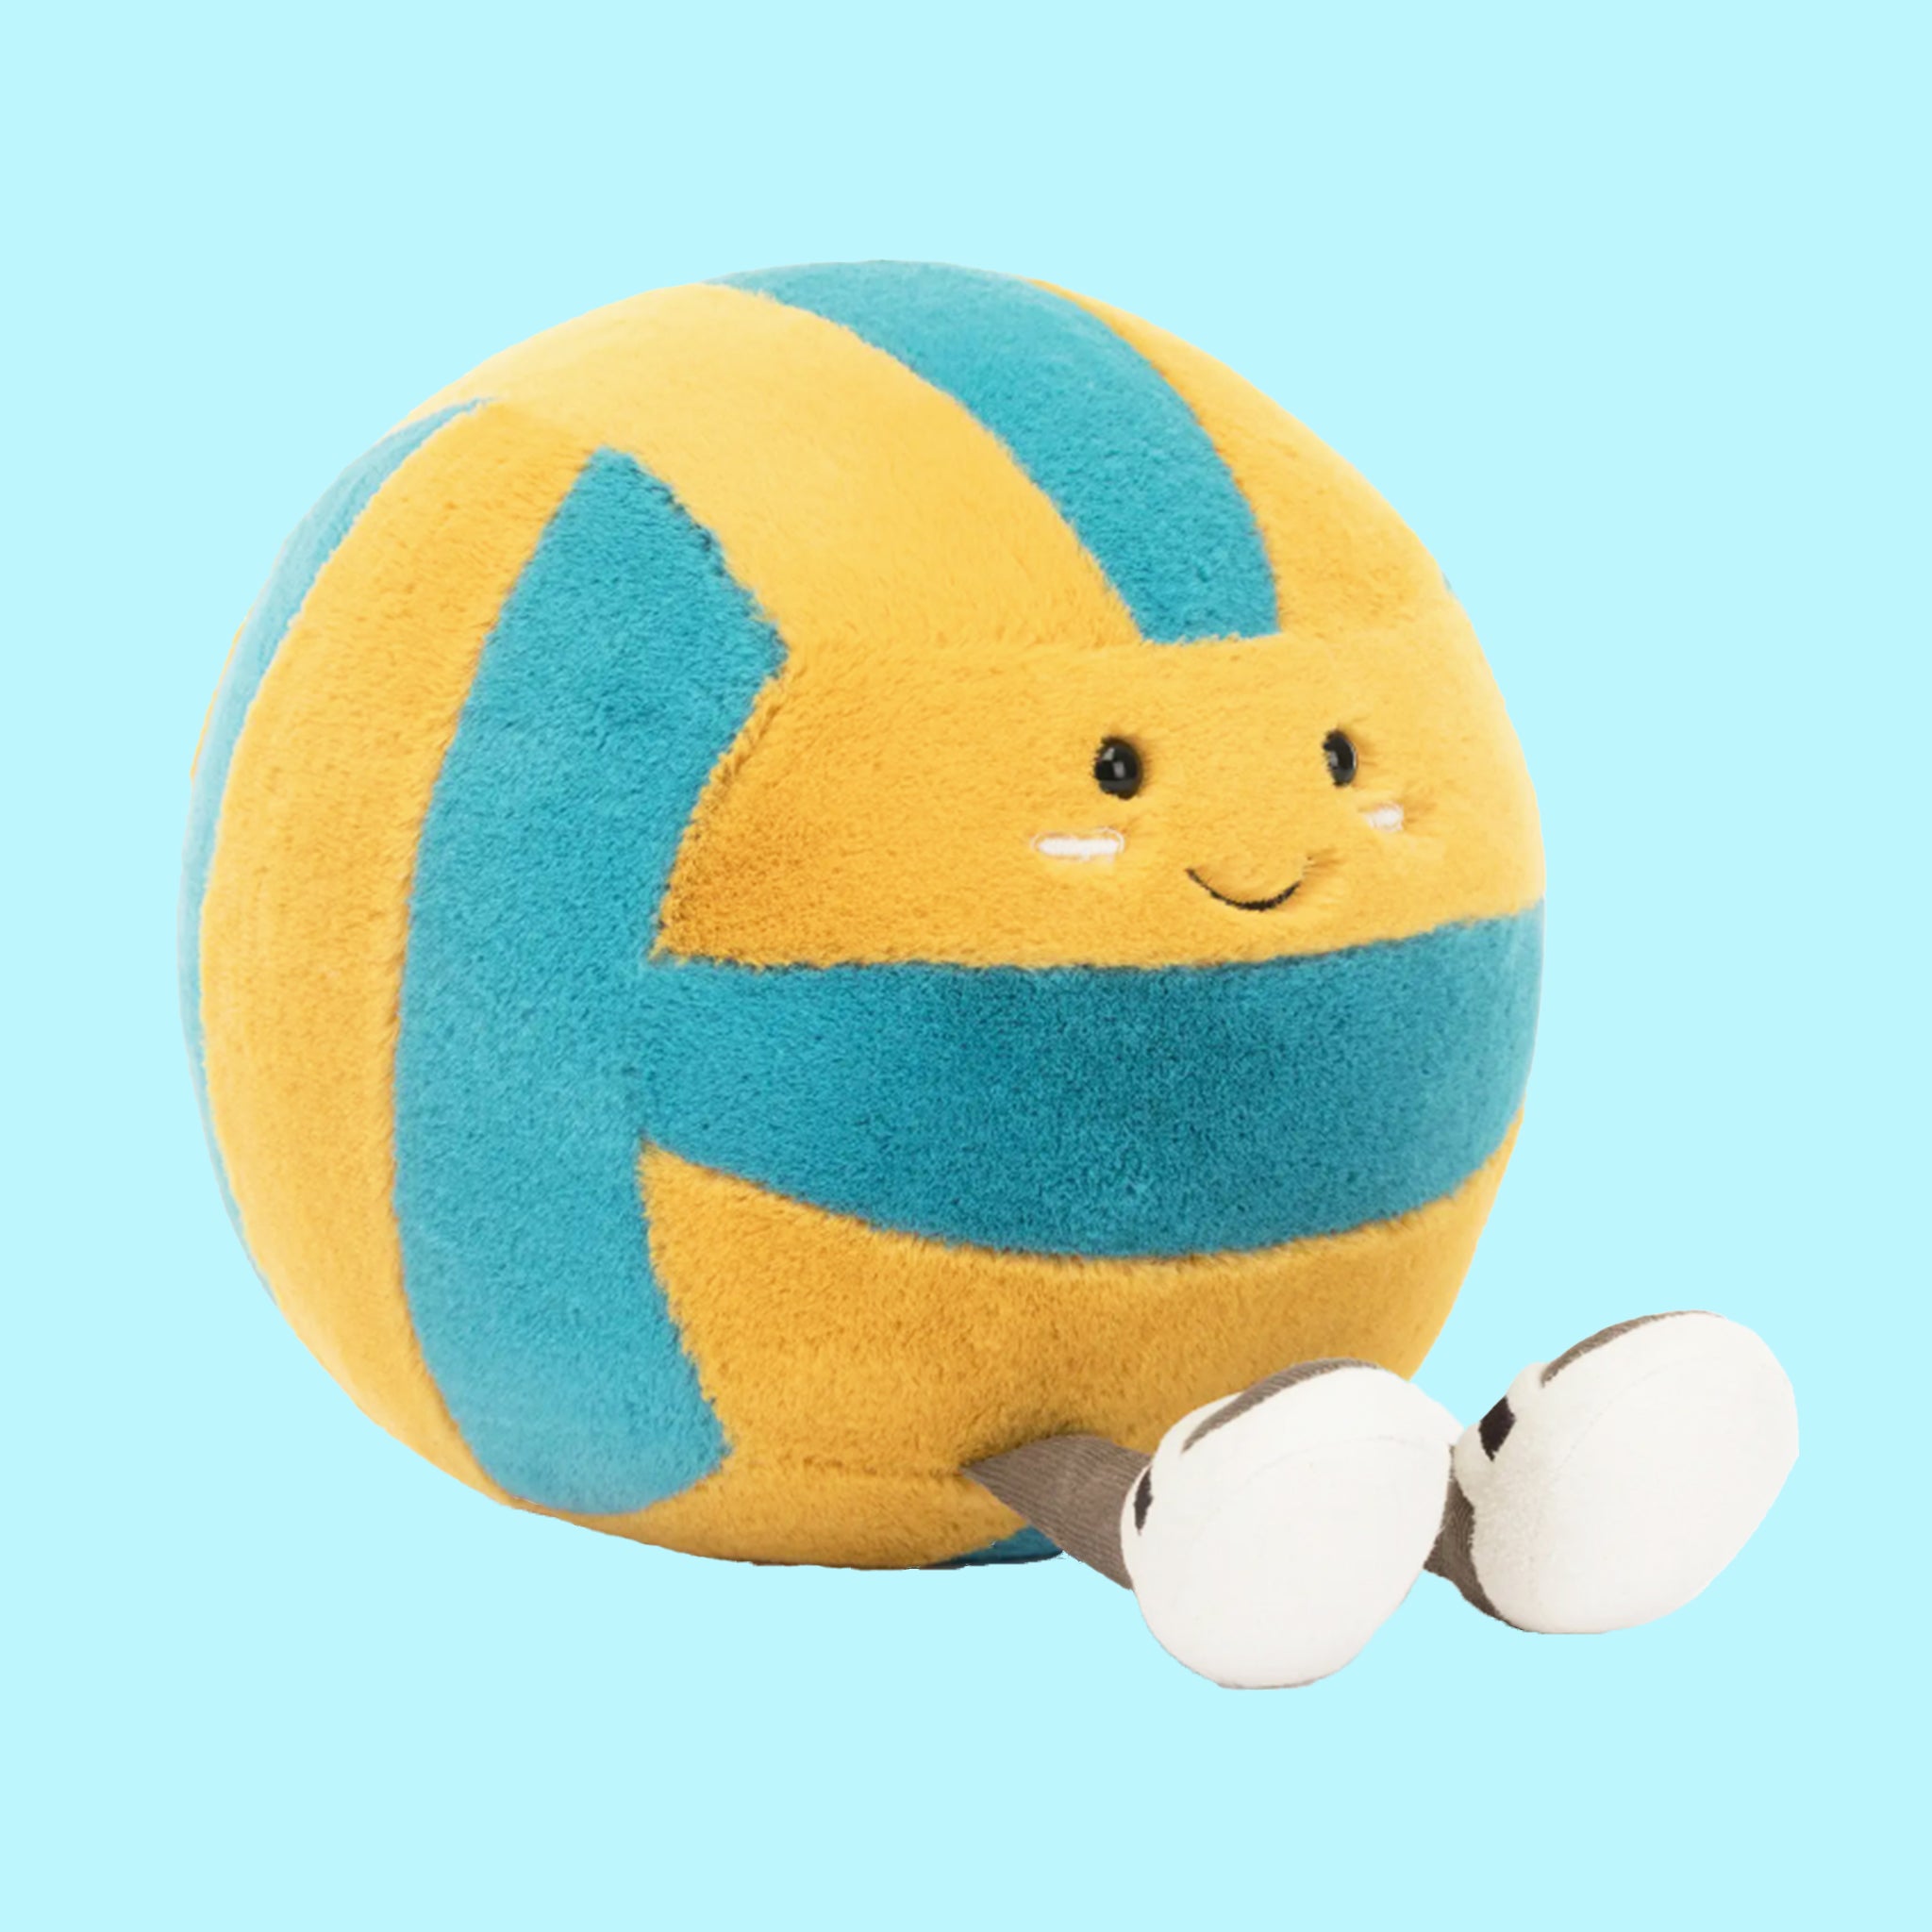 A blue and yellow stuffed toy in the shape of a volleyball with adorable legs, feet and a smiling face. 